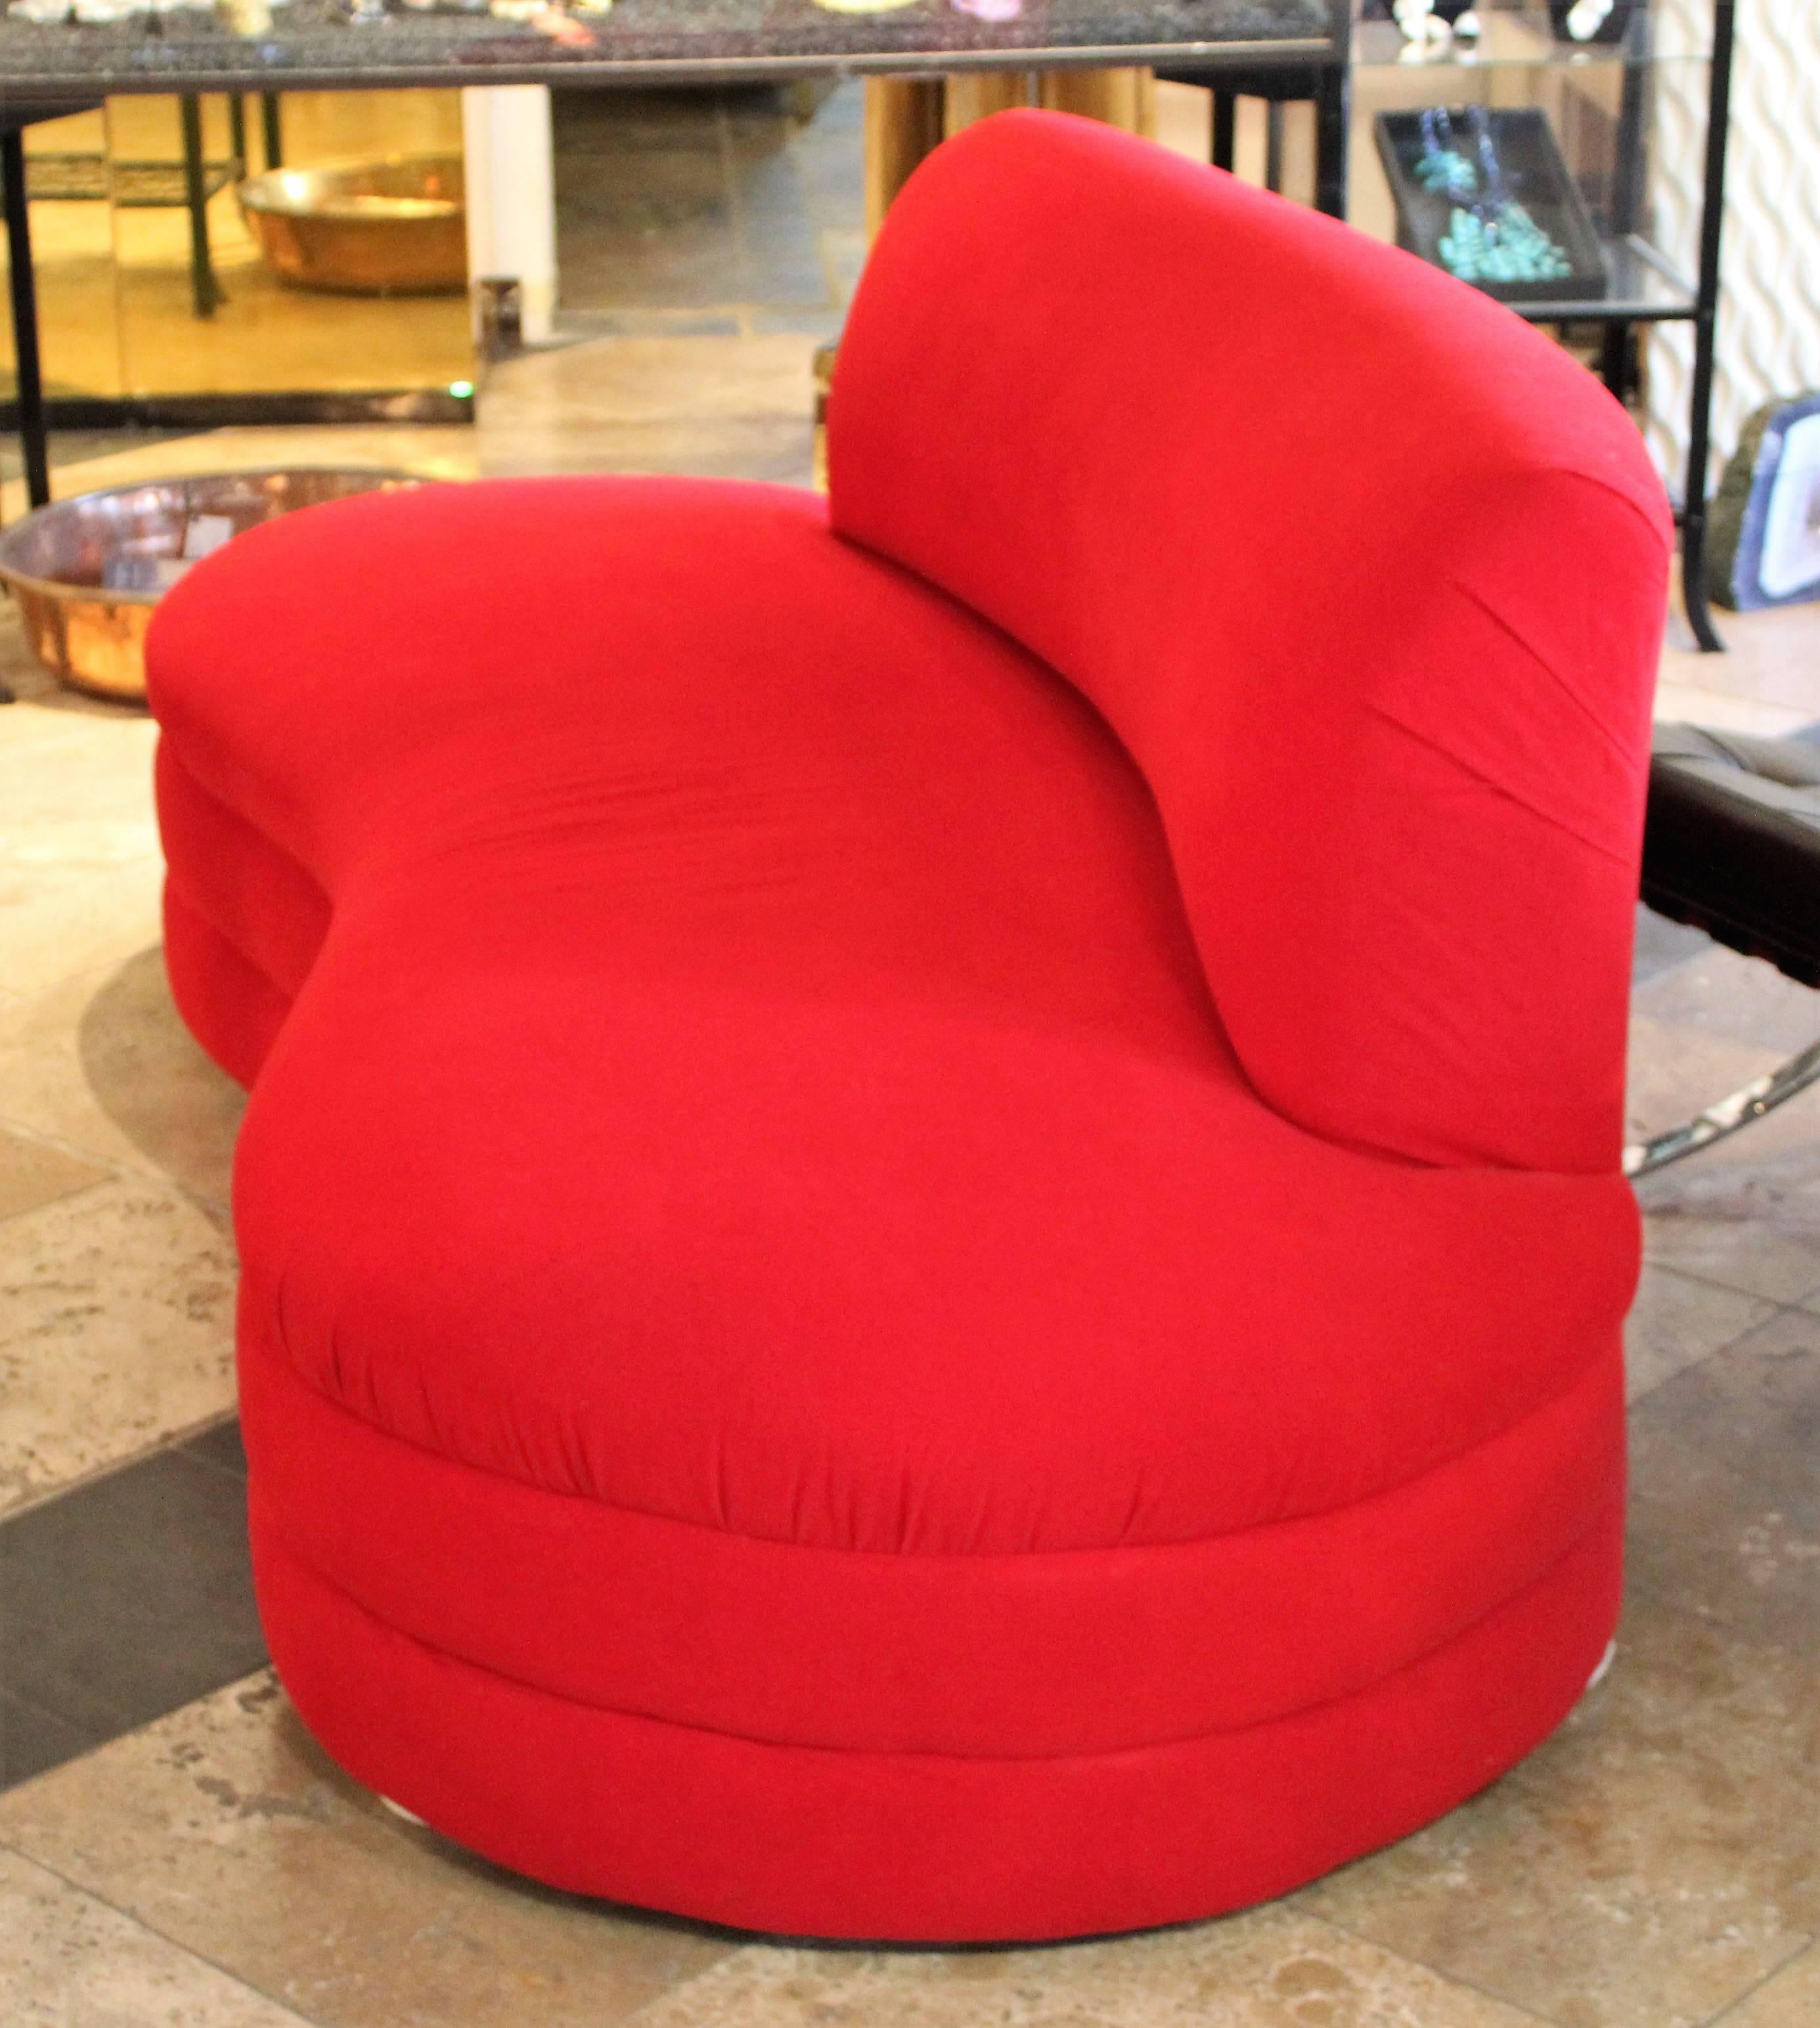 Fabulous Vladimir Kagan style iconic biomorphic shaped sofa, with original poly-cotton blue-red fabric. It is a great modern sofa in excellent vintage condition. Back is 56